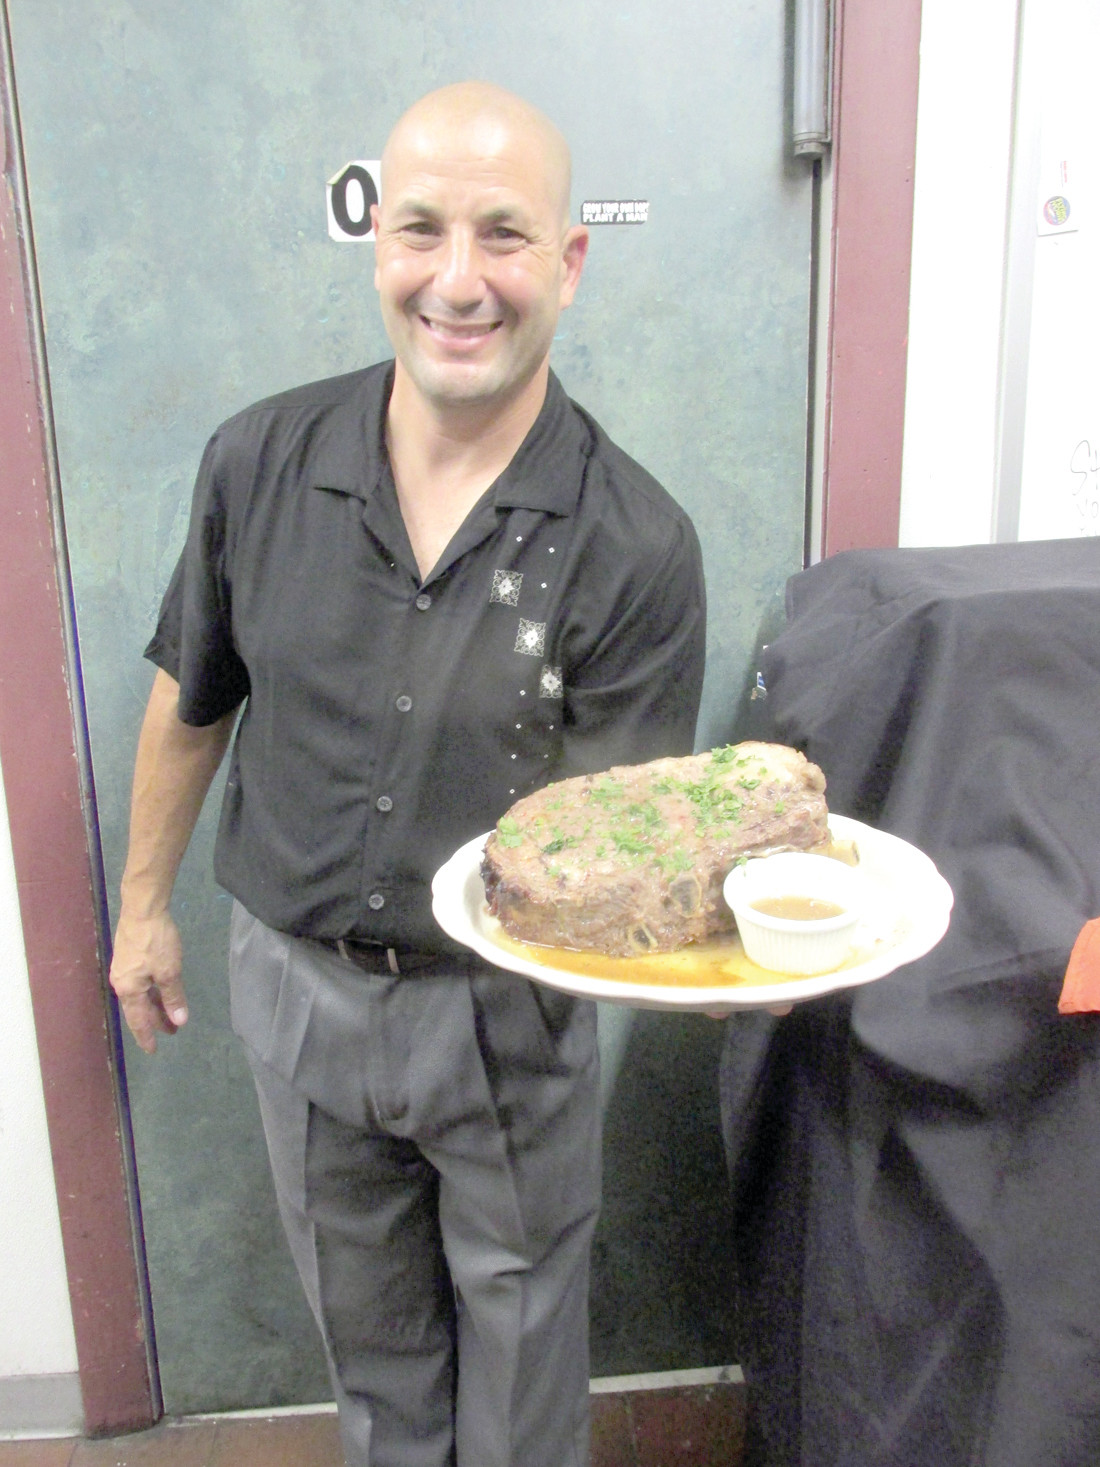 COLASSAL CUT: David Lombardo, owner of The Ave Restaurant Bar & Grill in Johnston, shows off the32-ounc cut of prime rib some people enjoyed during last Friday night’s Grand Opening.